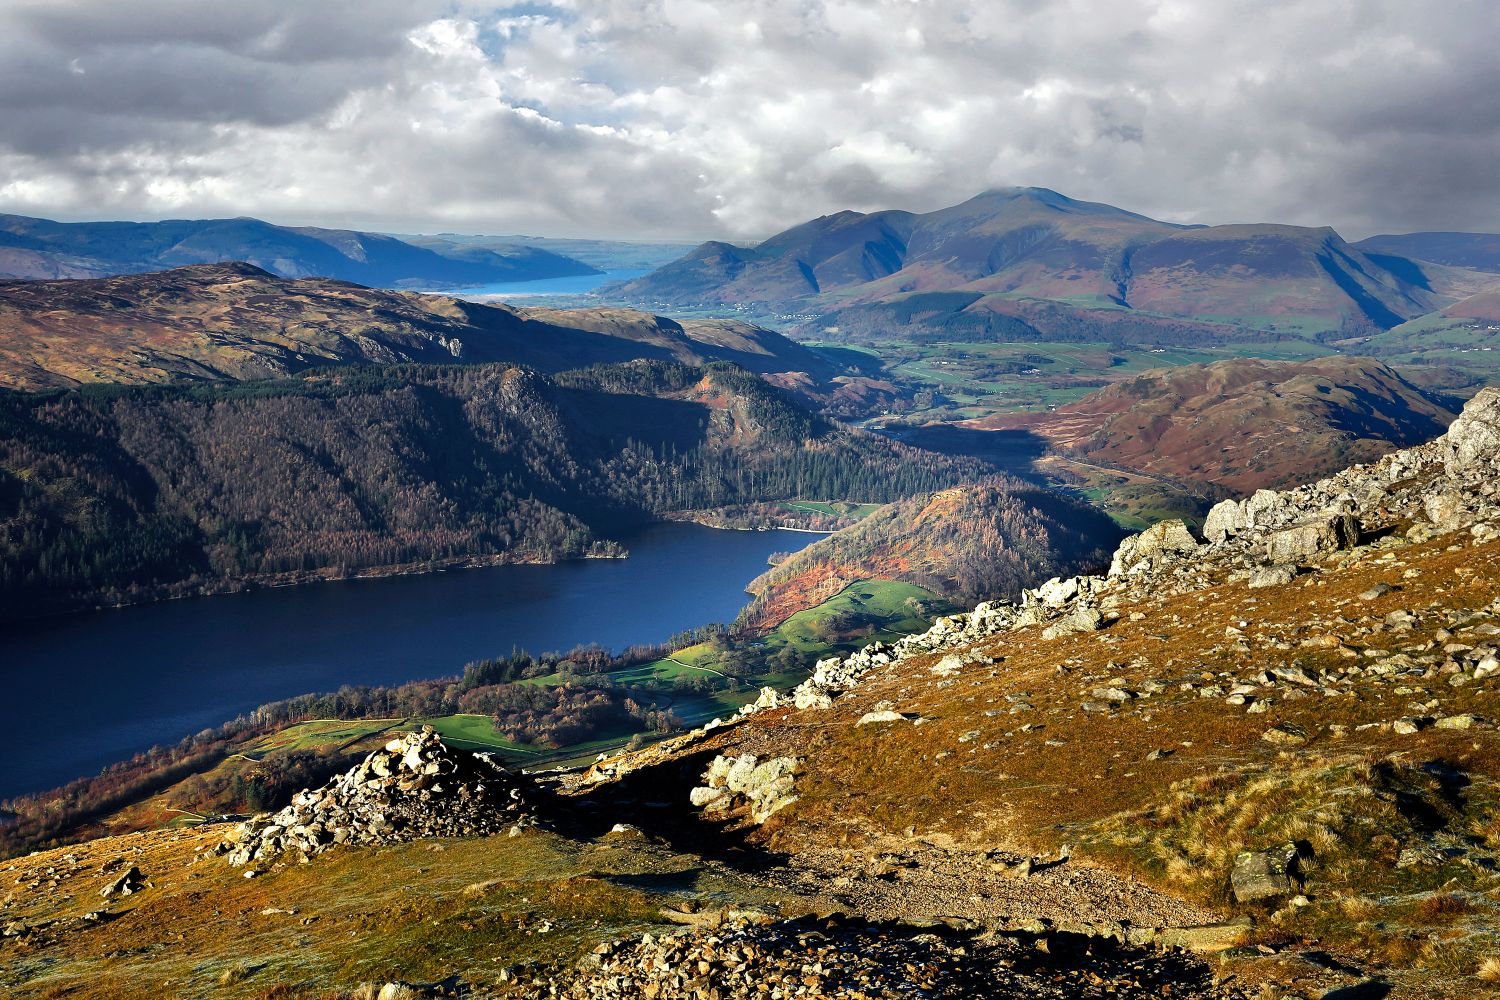 Skiddaw and Thirlmere from the descent of Helvellyn